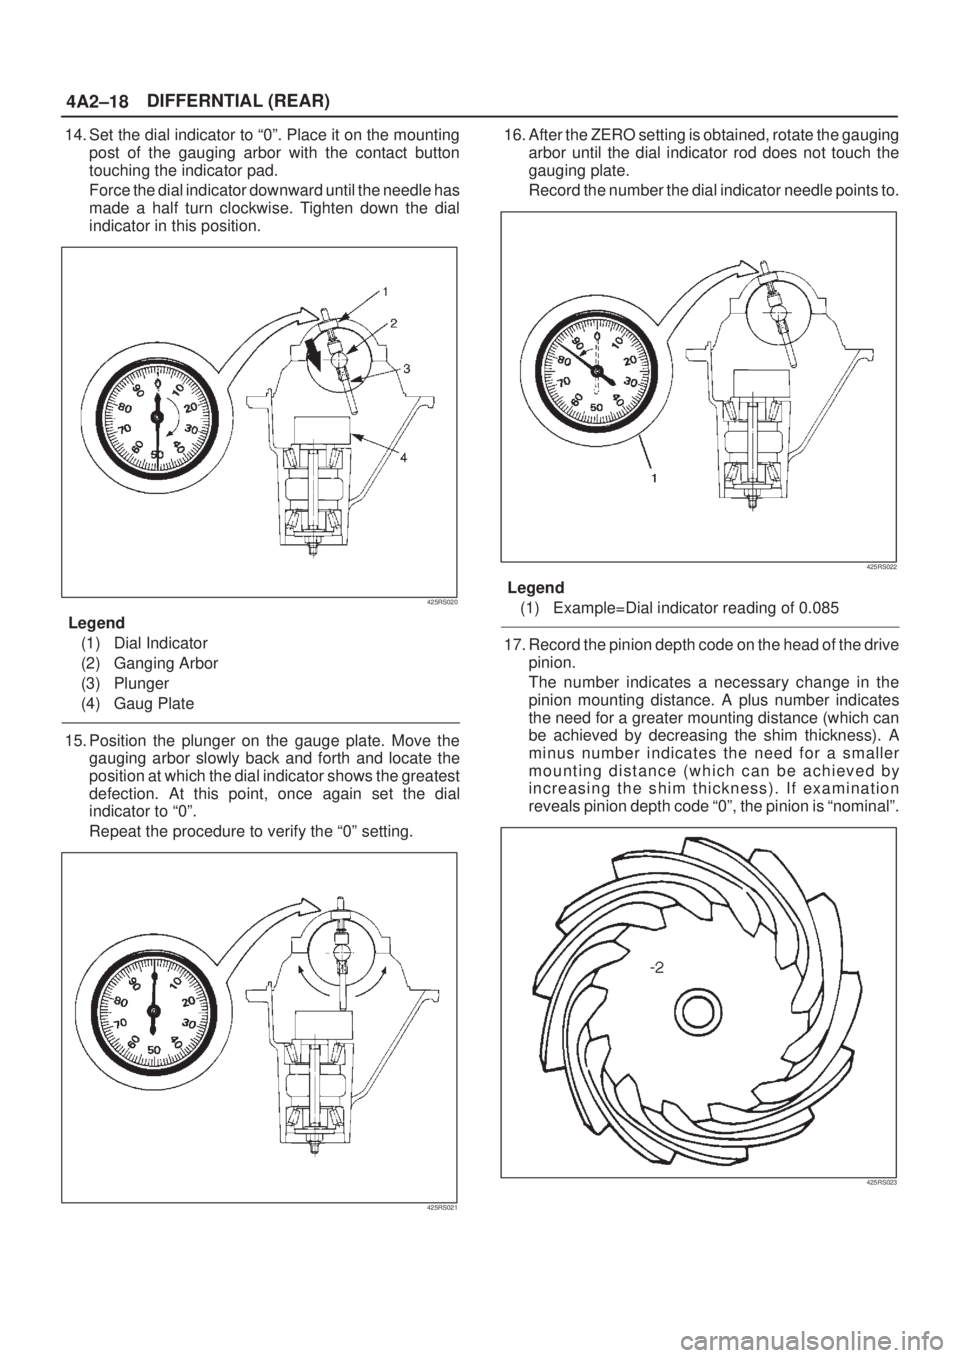 ISUZU AXIOM 2002  Service Repair Manual 4A2±18DIFFERNTIAL (REAR)
14. Set the dial indicator to ª0º. Place it on the mounting
post of the gauging arbor with the contact button
touching the indicator pad.
Force the dial indicator downward 